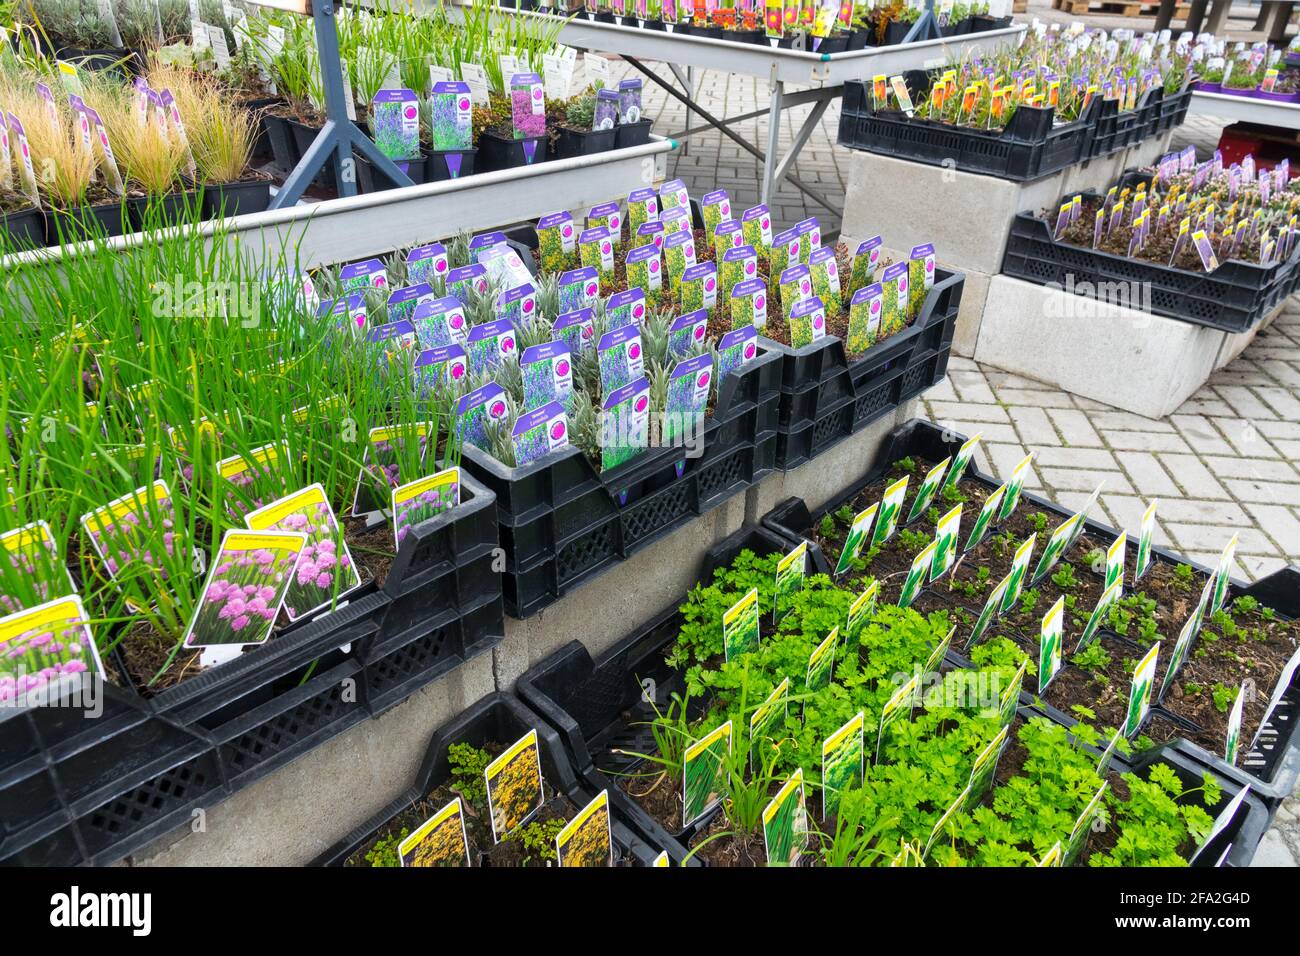 Perennial seedlings in crates for sale in display, garden center plants potted, spring gardening Stock Photo